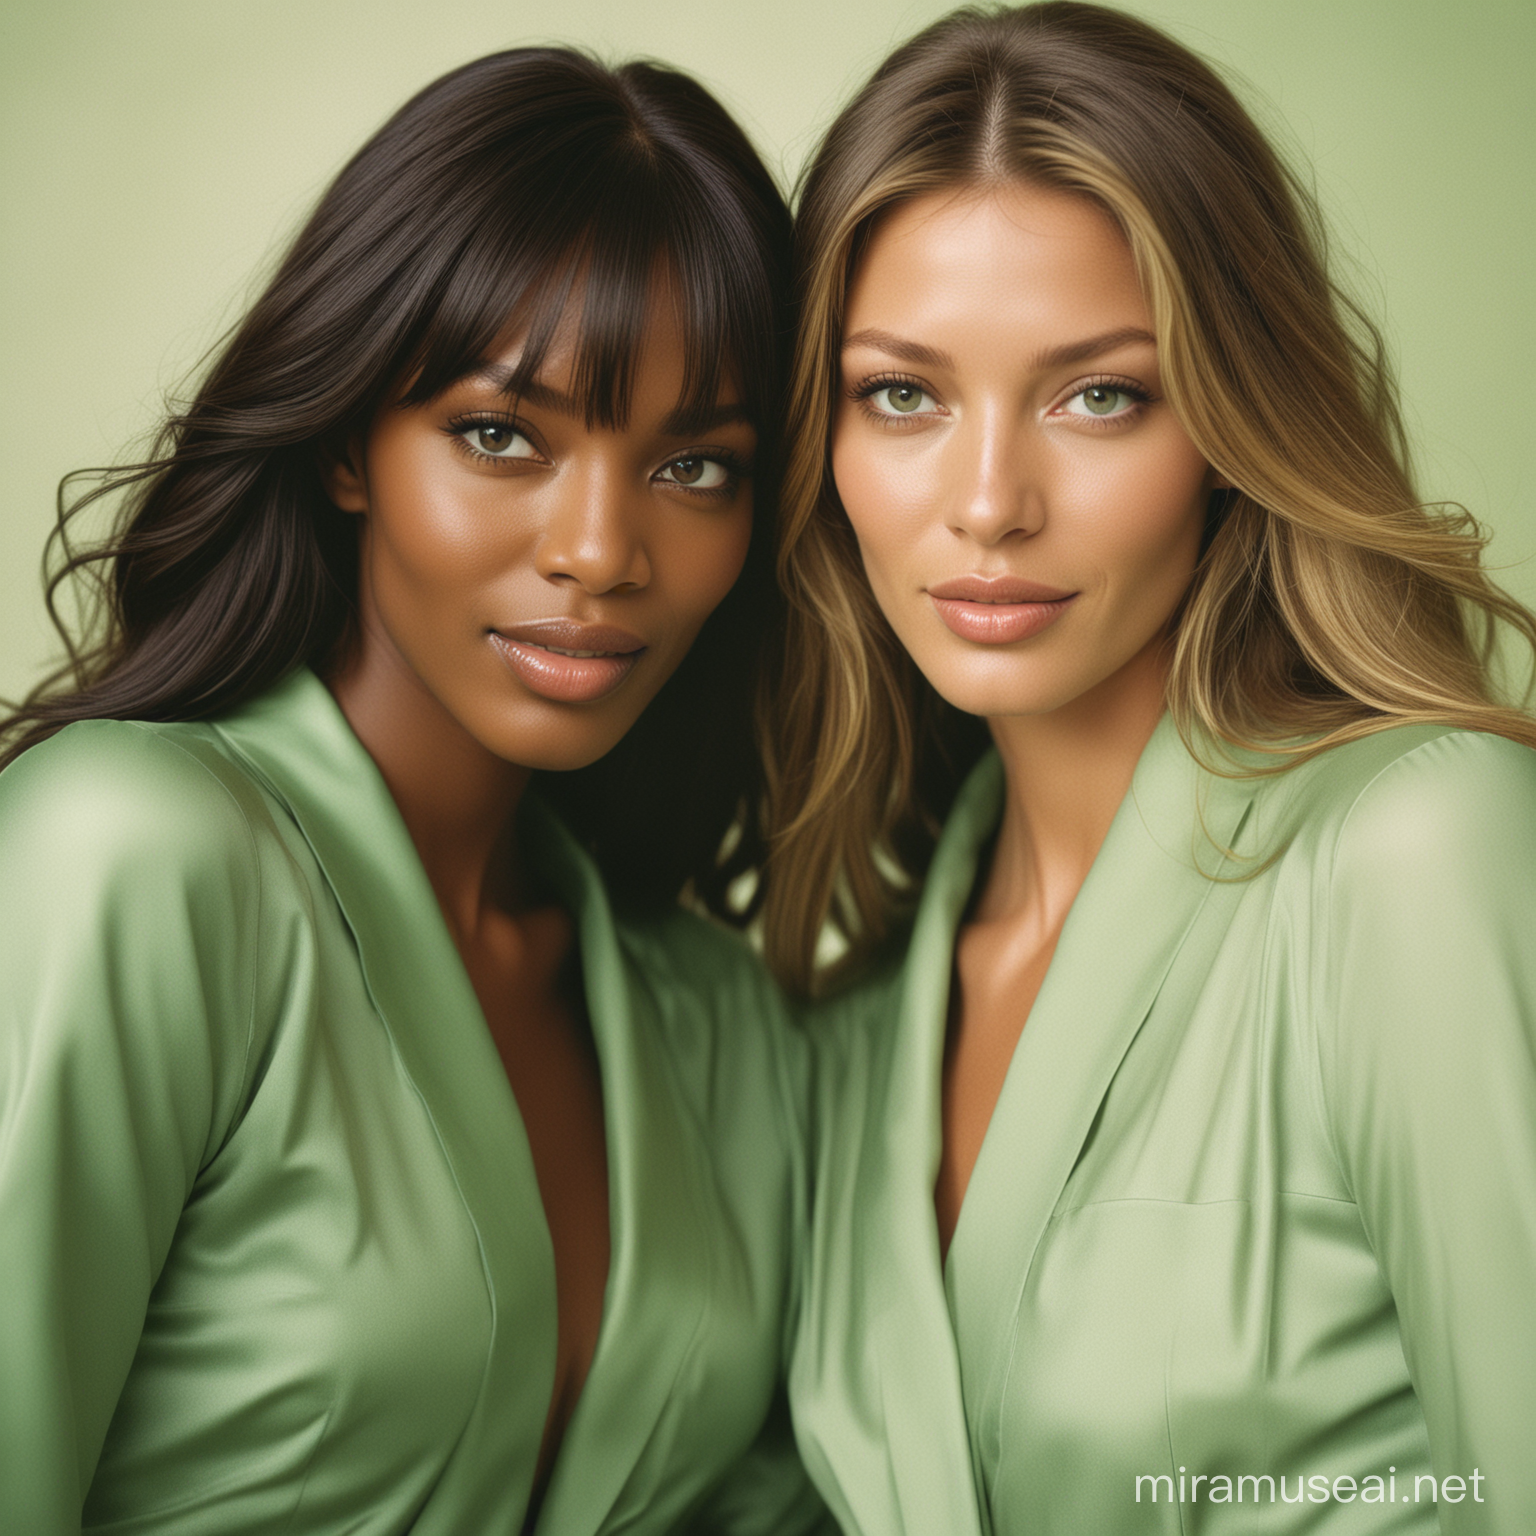 Luxurious Green Fashion Naomi Campbell and Gisele Bndchen in Vibrant Collage Style